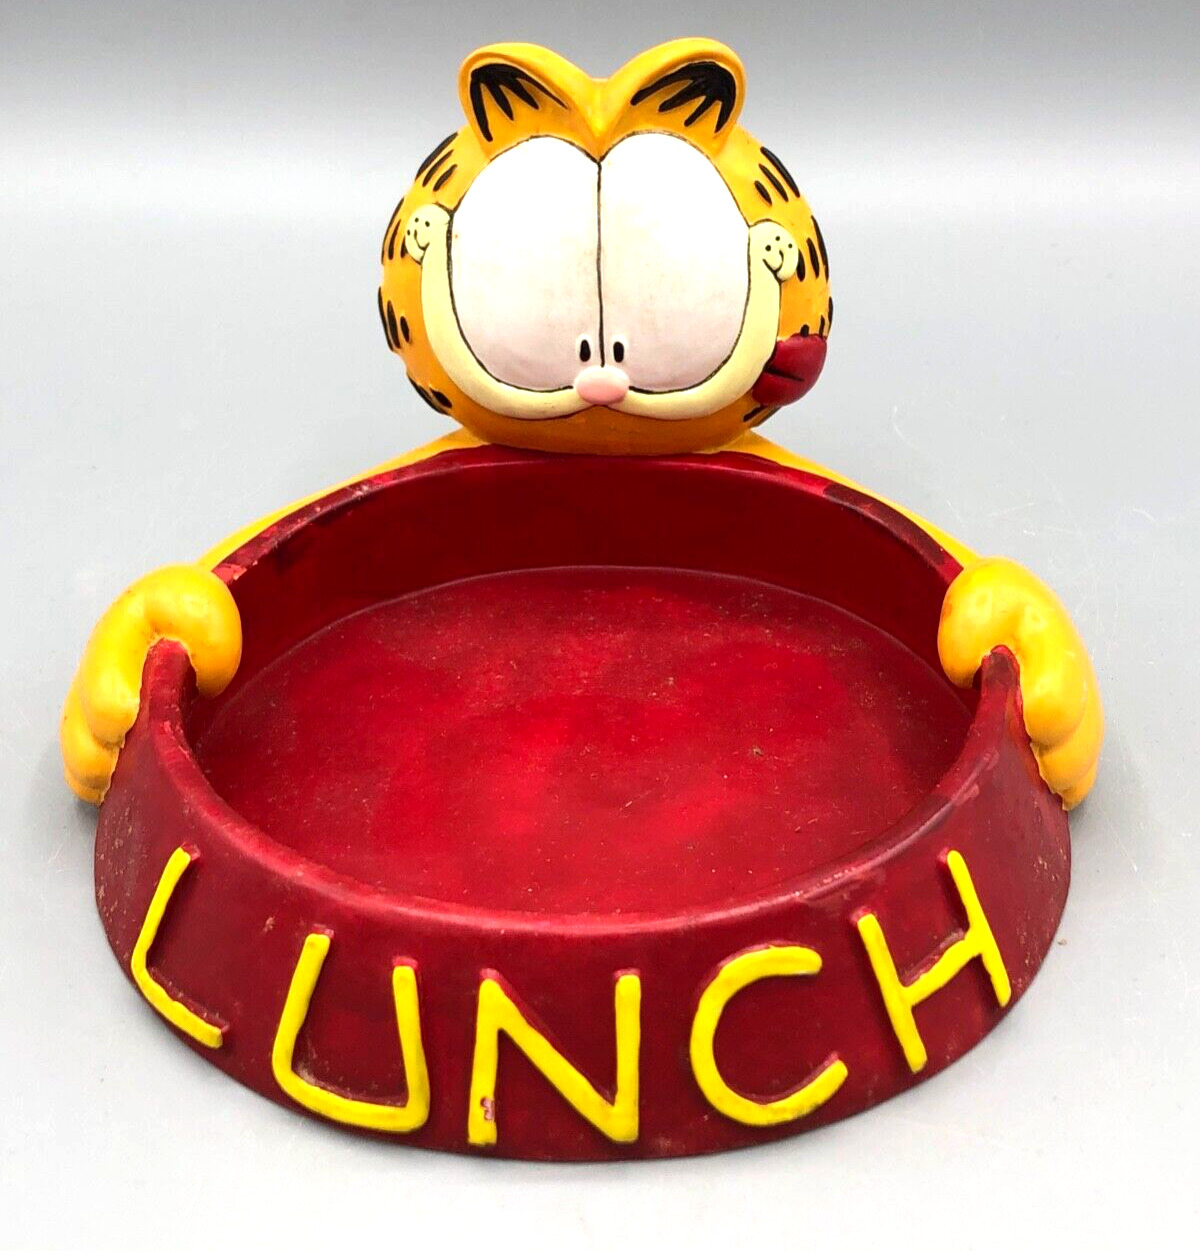 RARE Vintage Garfield The Cat LUNCH Ceramic Pet Food Dish Paws, Inc.